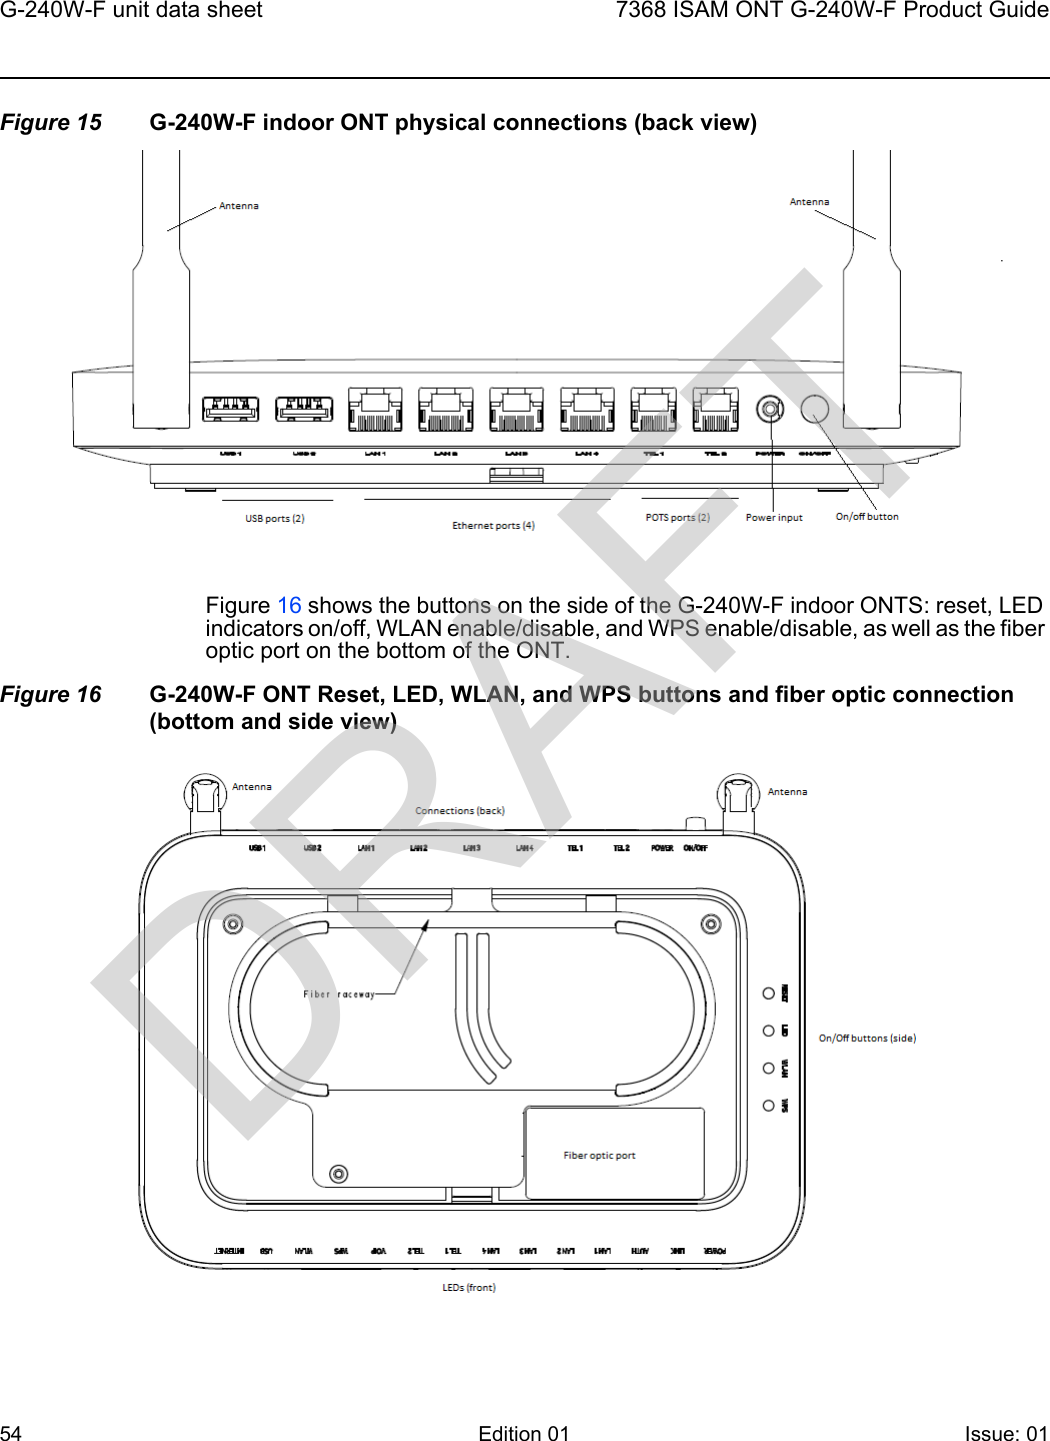 G-240W-F unit data sheet547368 ISAM ONT G-240W-F Product GuideEdition 01 Issue: 01 Figure 15 G-240W-F indoor ONT physical connections (back view)Figure 16 shows the buttons on the side of the G-240W-F indoor ONTS: reset, LED indicators on/off, WLAN enable/disable, and WPS enable/disable, as well as the fiber optic port on the bottom of the ONT.Figure 16 G-240W-F ONT Reset, LED, WLAN, and WPS buttons and fiber optic connection (bottom and side view)DRAFT